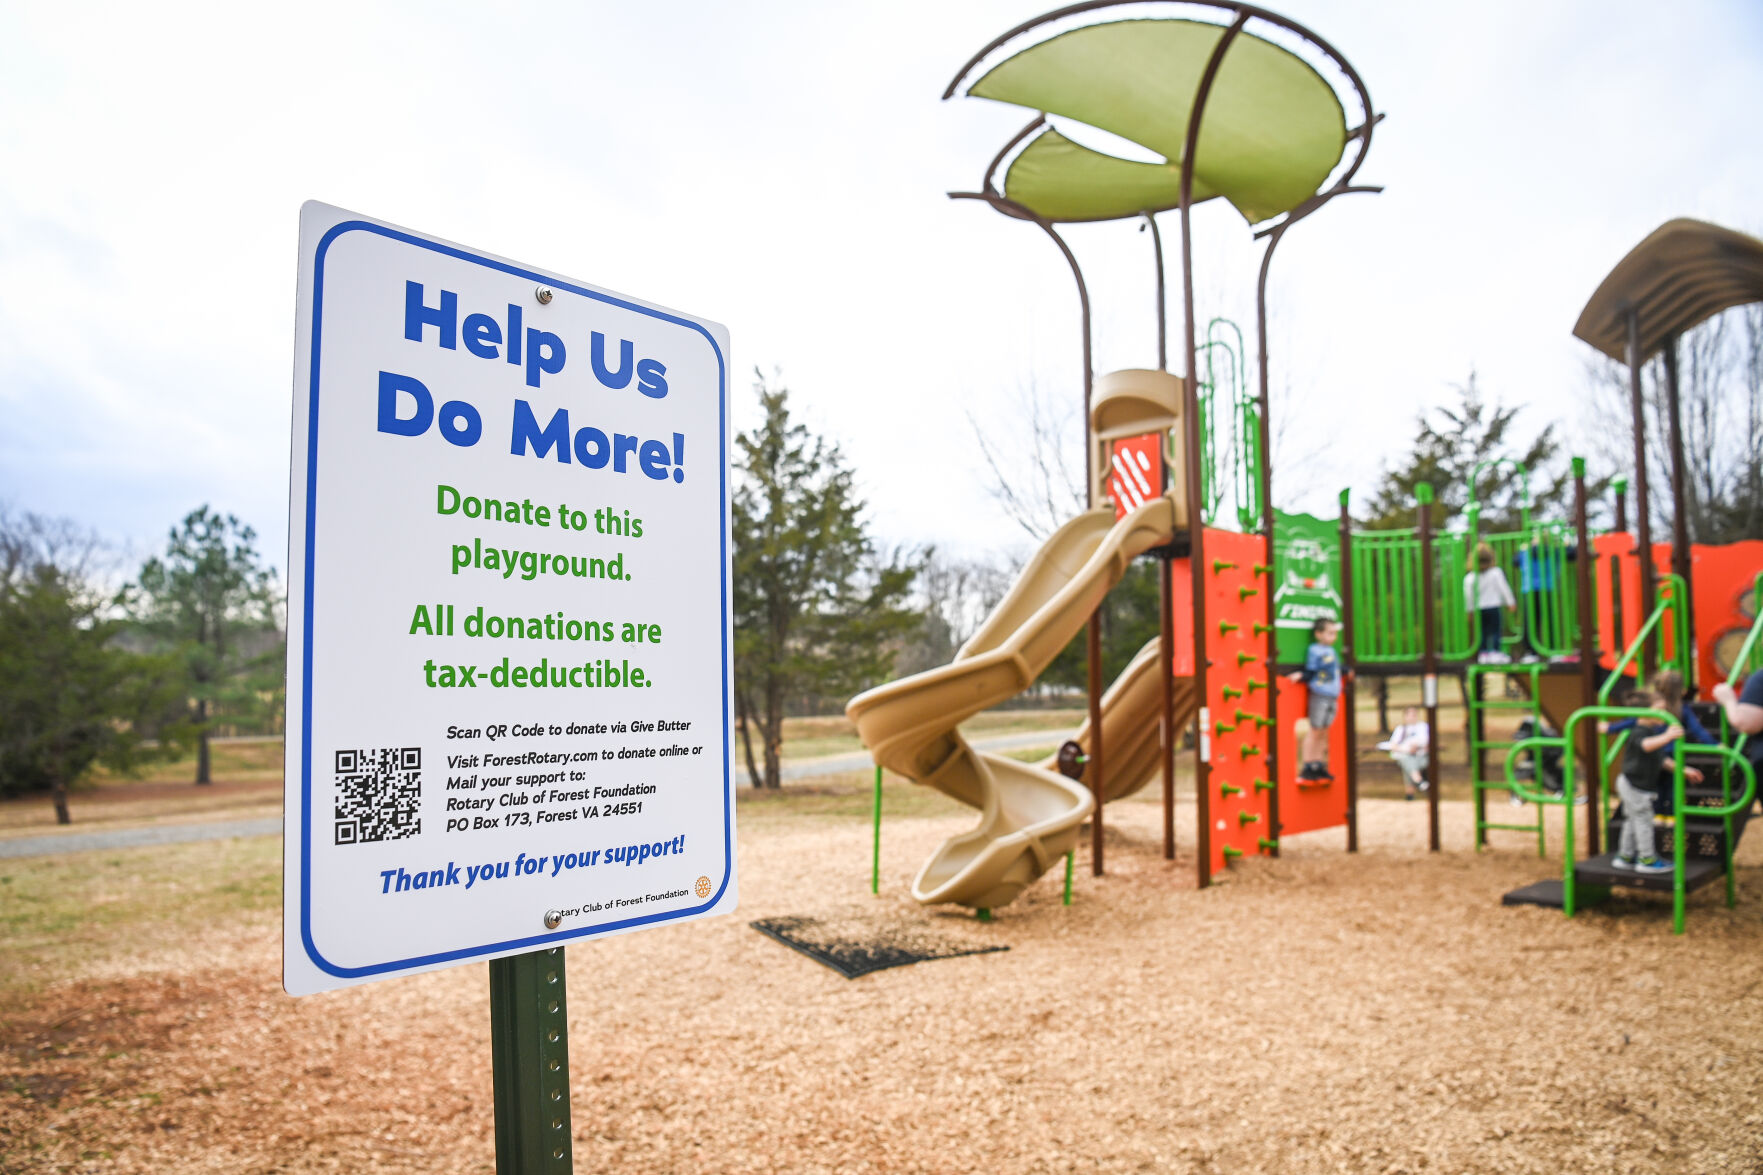 New, inclusive playground coming to Forest picture